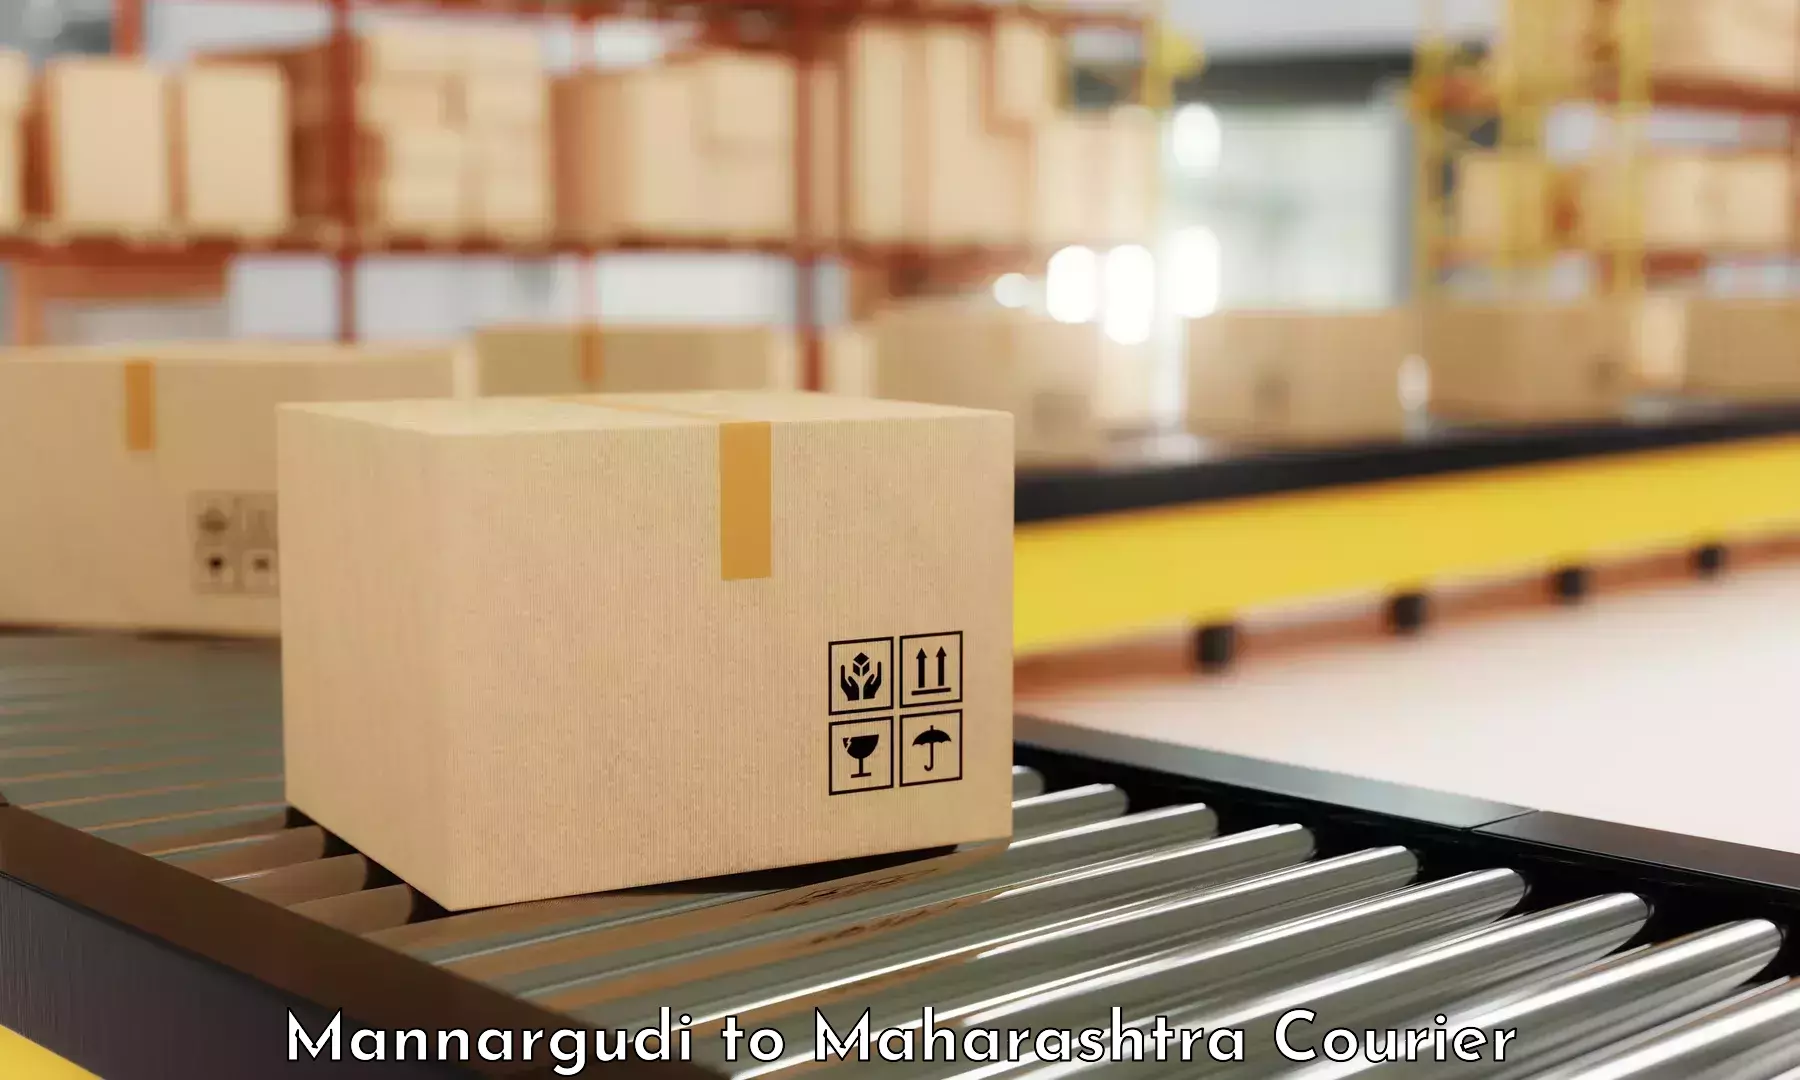 Subscription-based courier Mannargudi to Mayani